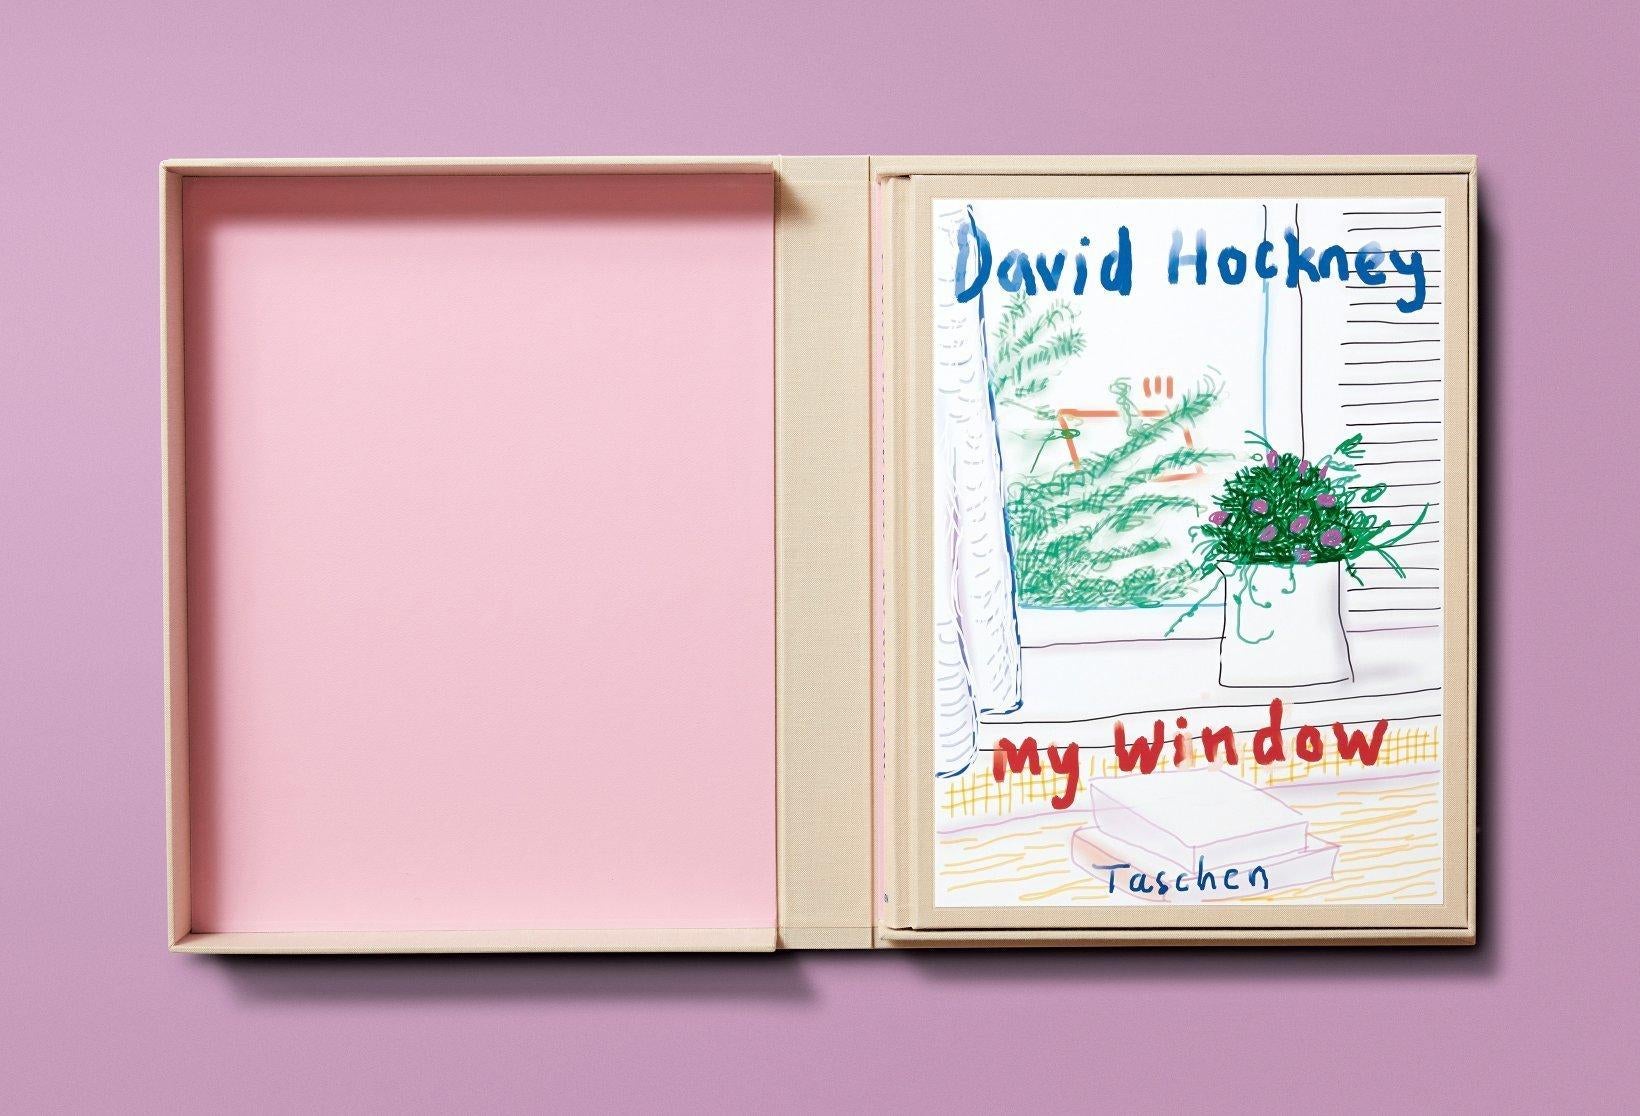 In this artist’s book of 120 iPhone and iPad drawings, David Hockney follows the course of the seasons through the window of his Yorkshire home. Each image depicts a fleeting moment—from the colorful sunrise and lilac morning sky to nighttime